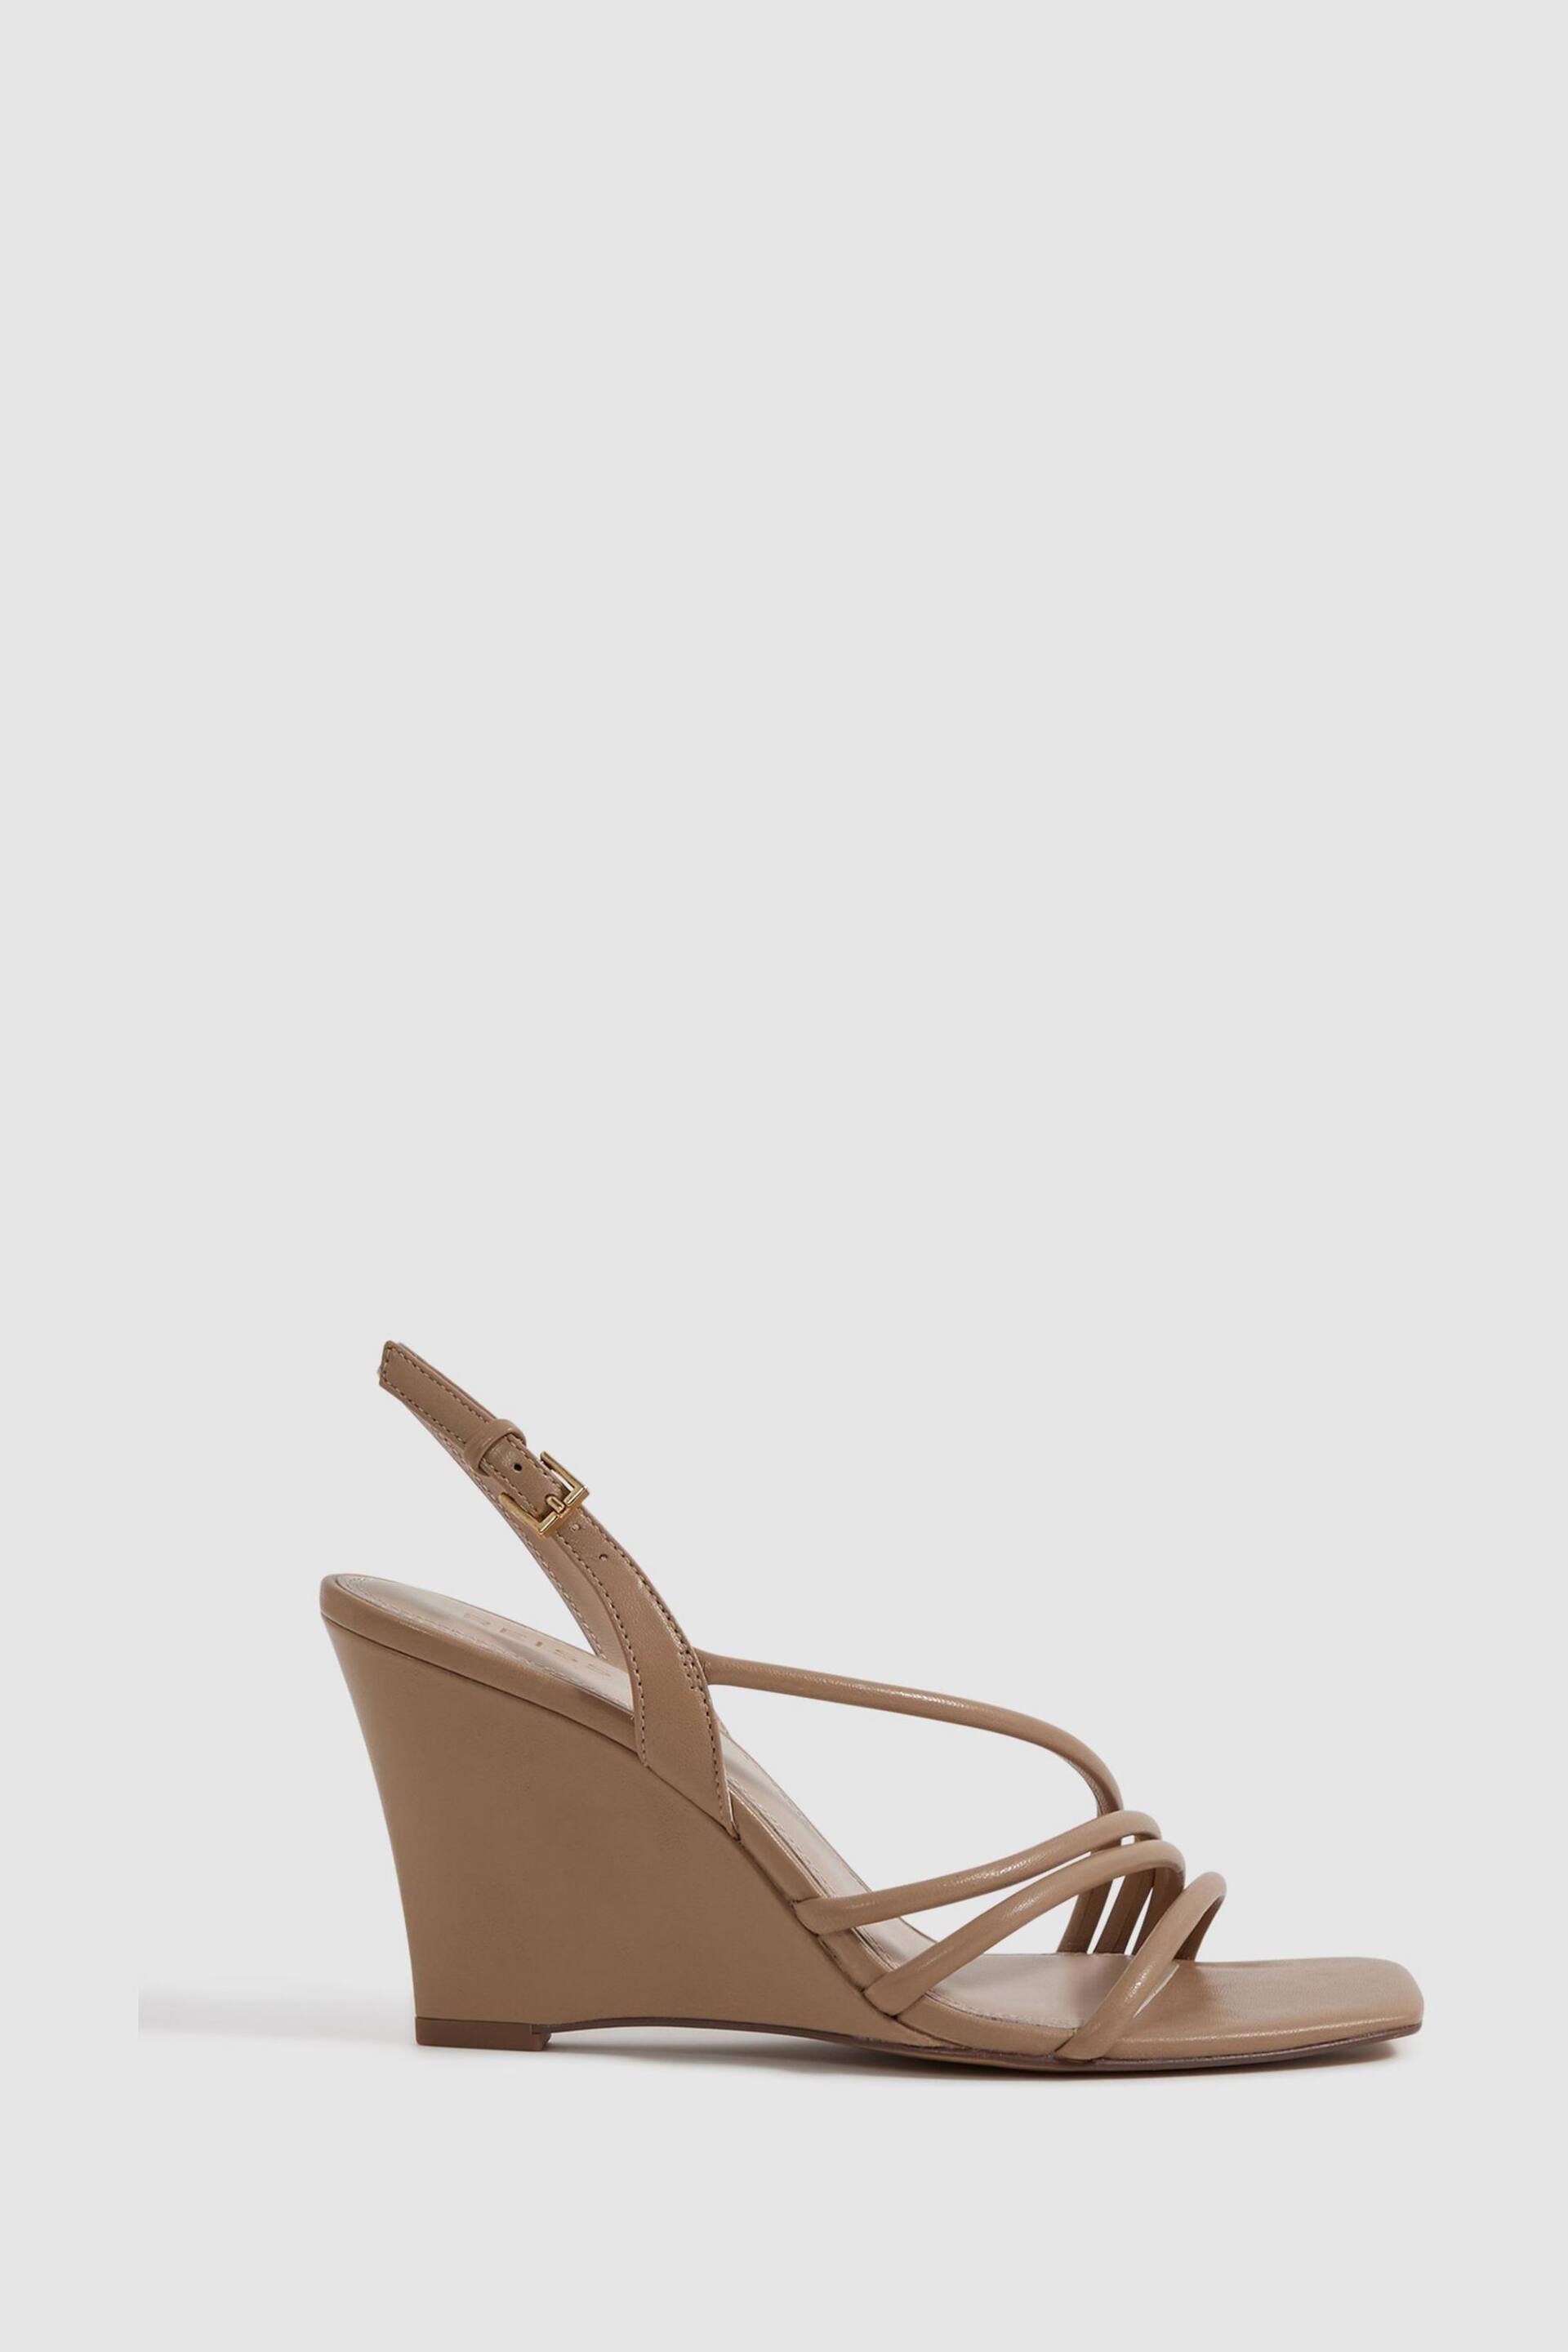 Reiss Nude Anya Leather Strappy Wedge Heels - Image 1 of 5